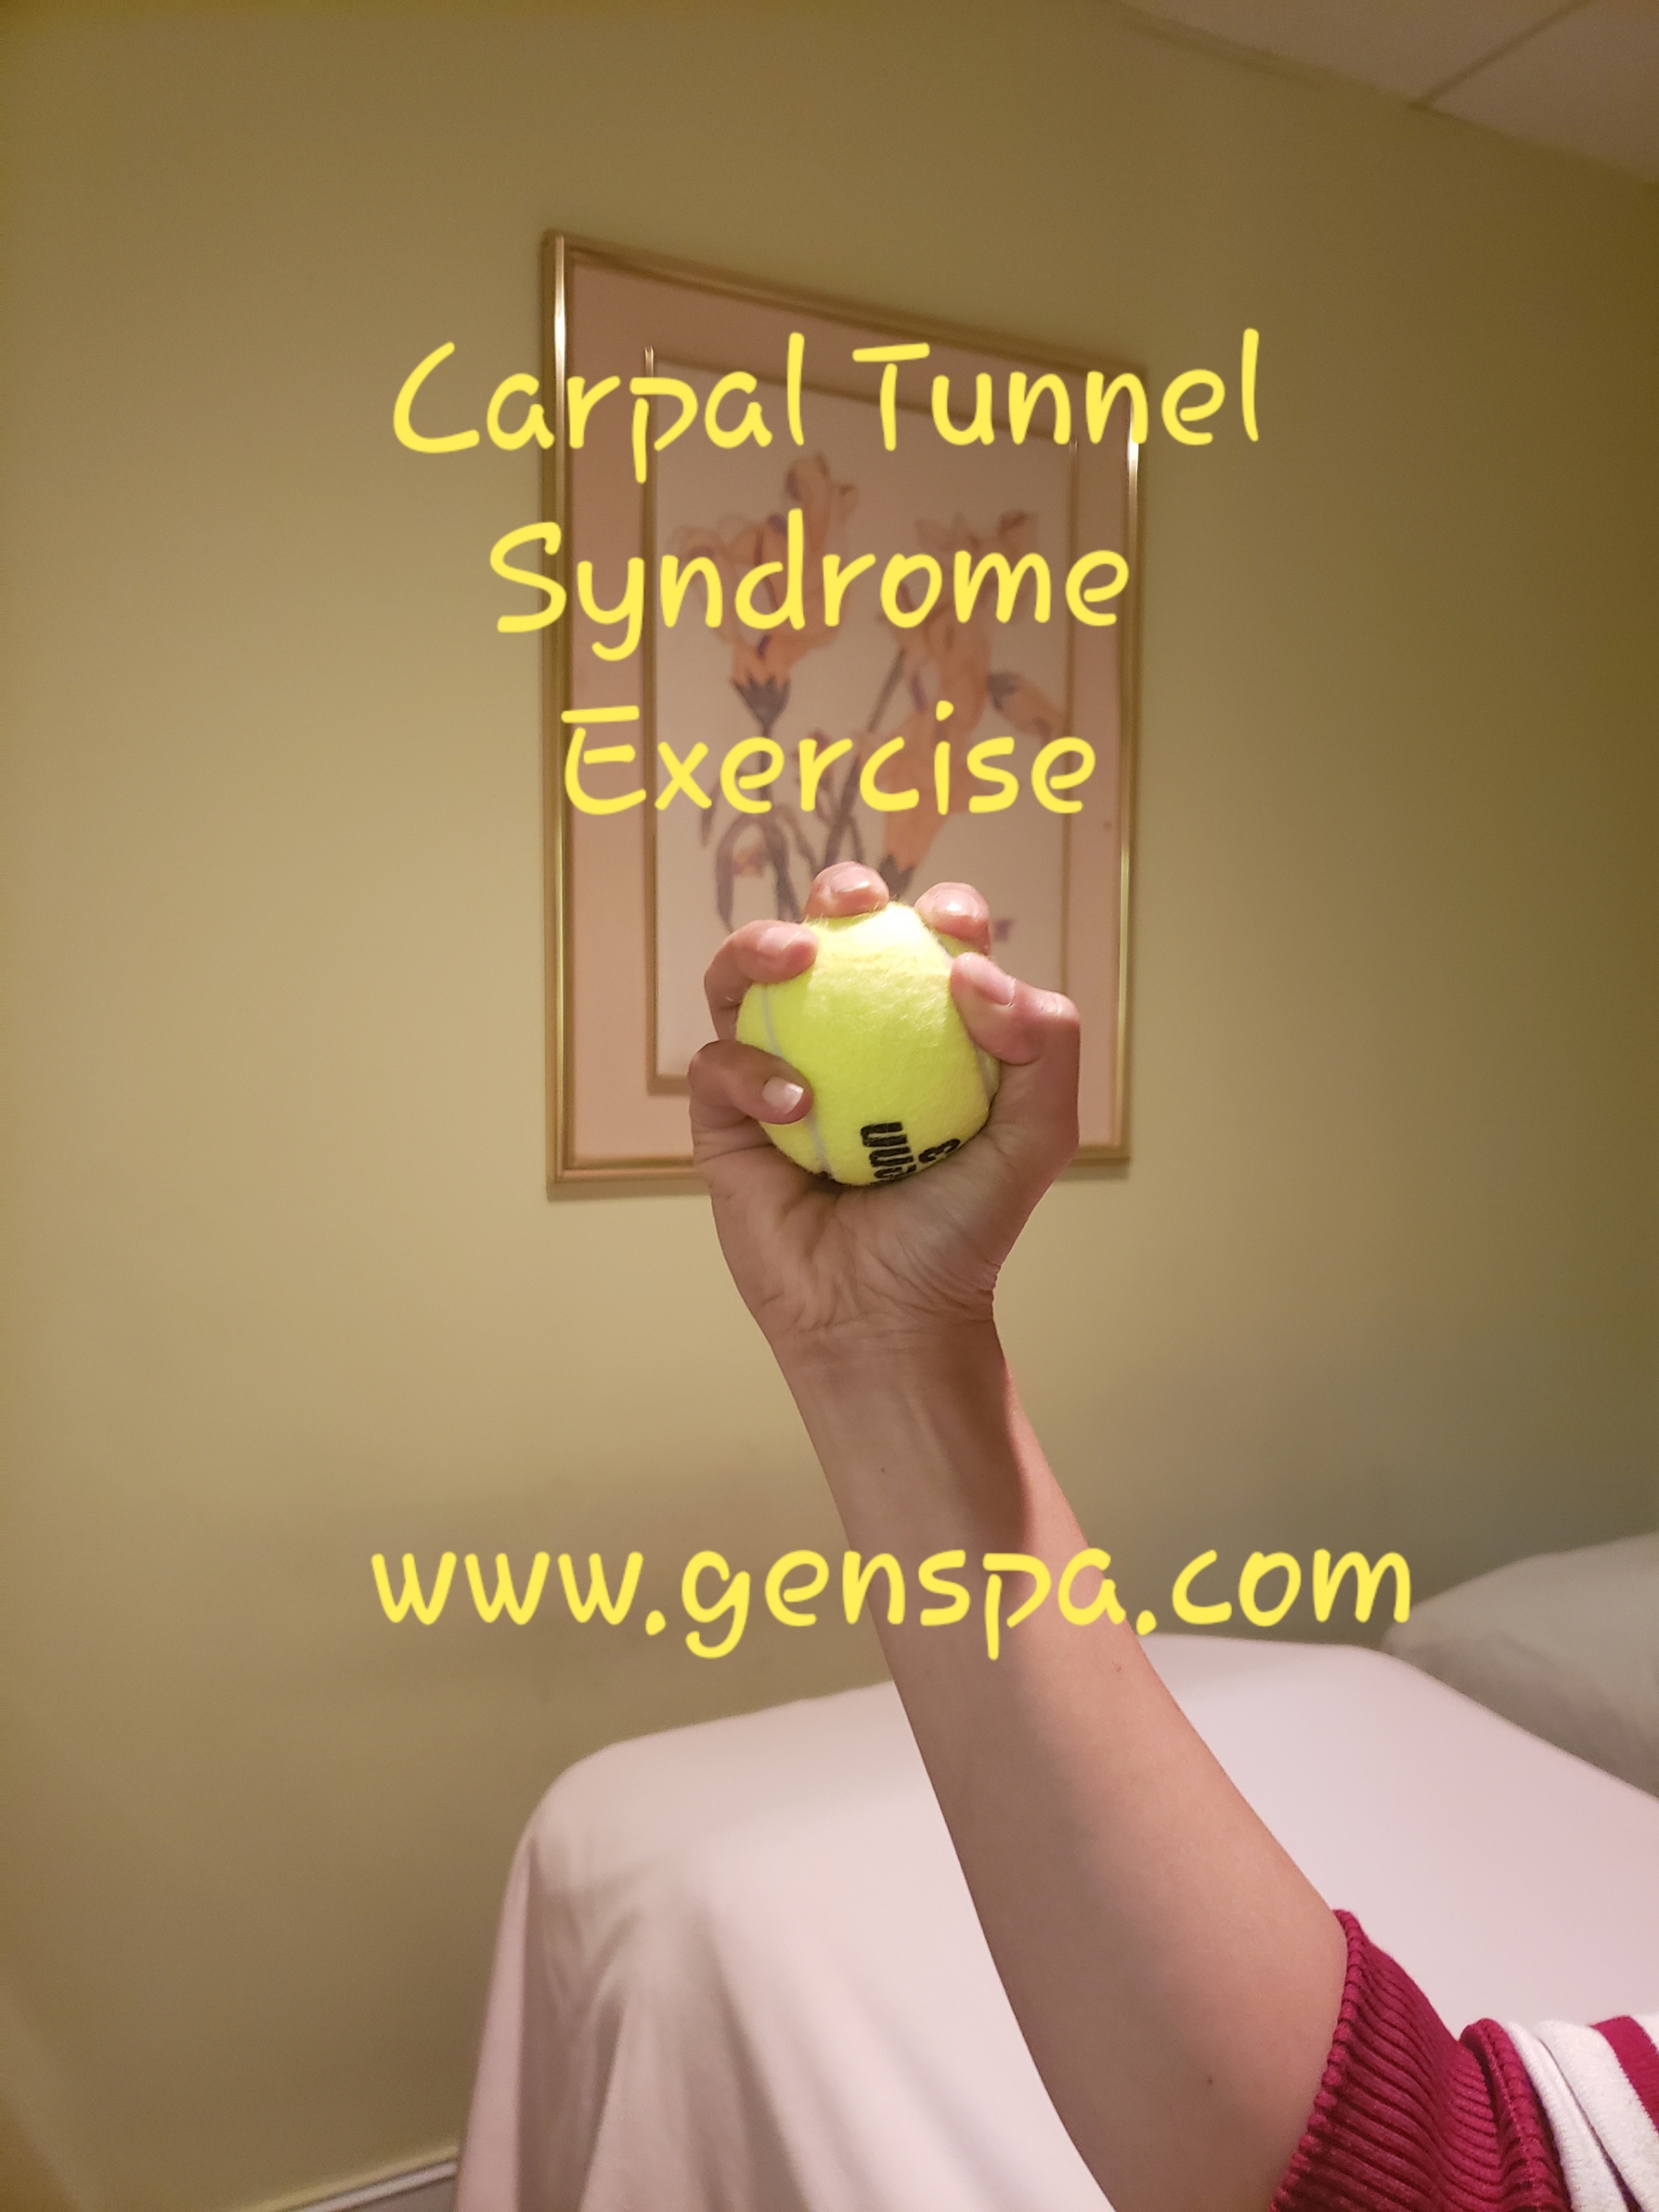 Massage Treatment for Carpal Tunnel Syndrome to Treat Carpal Tunnel without surgery